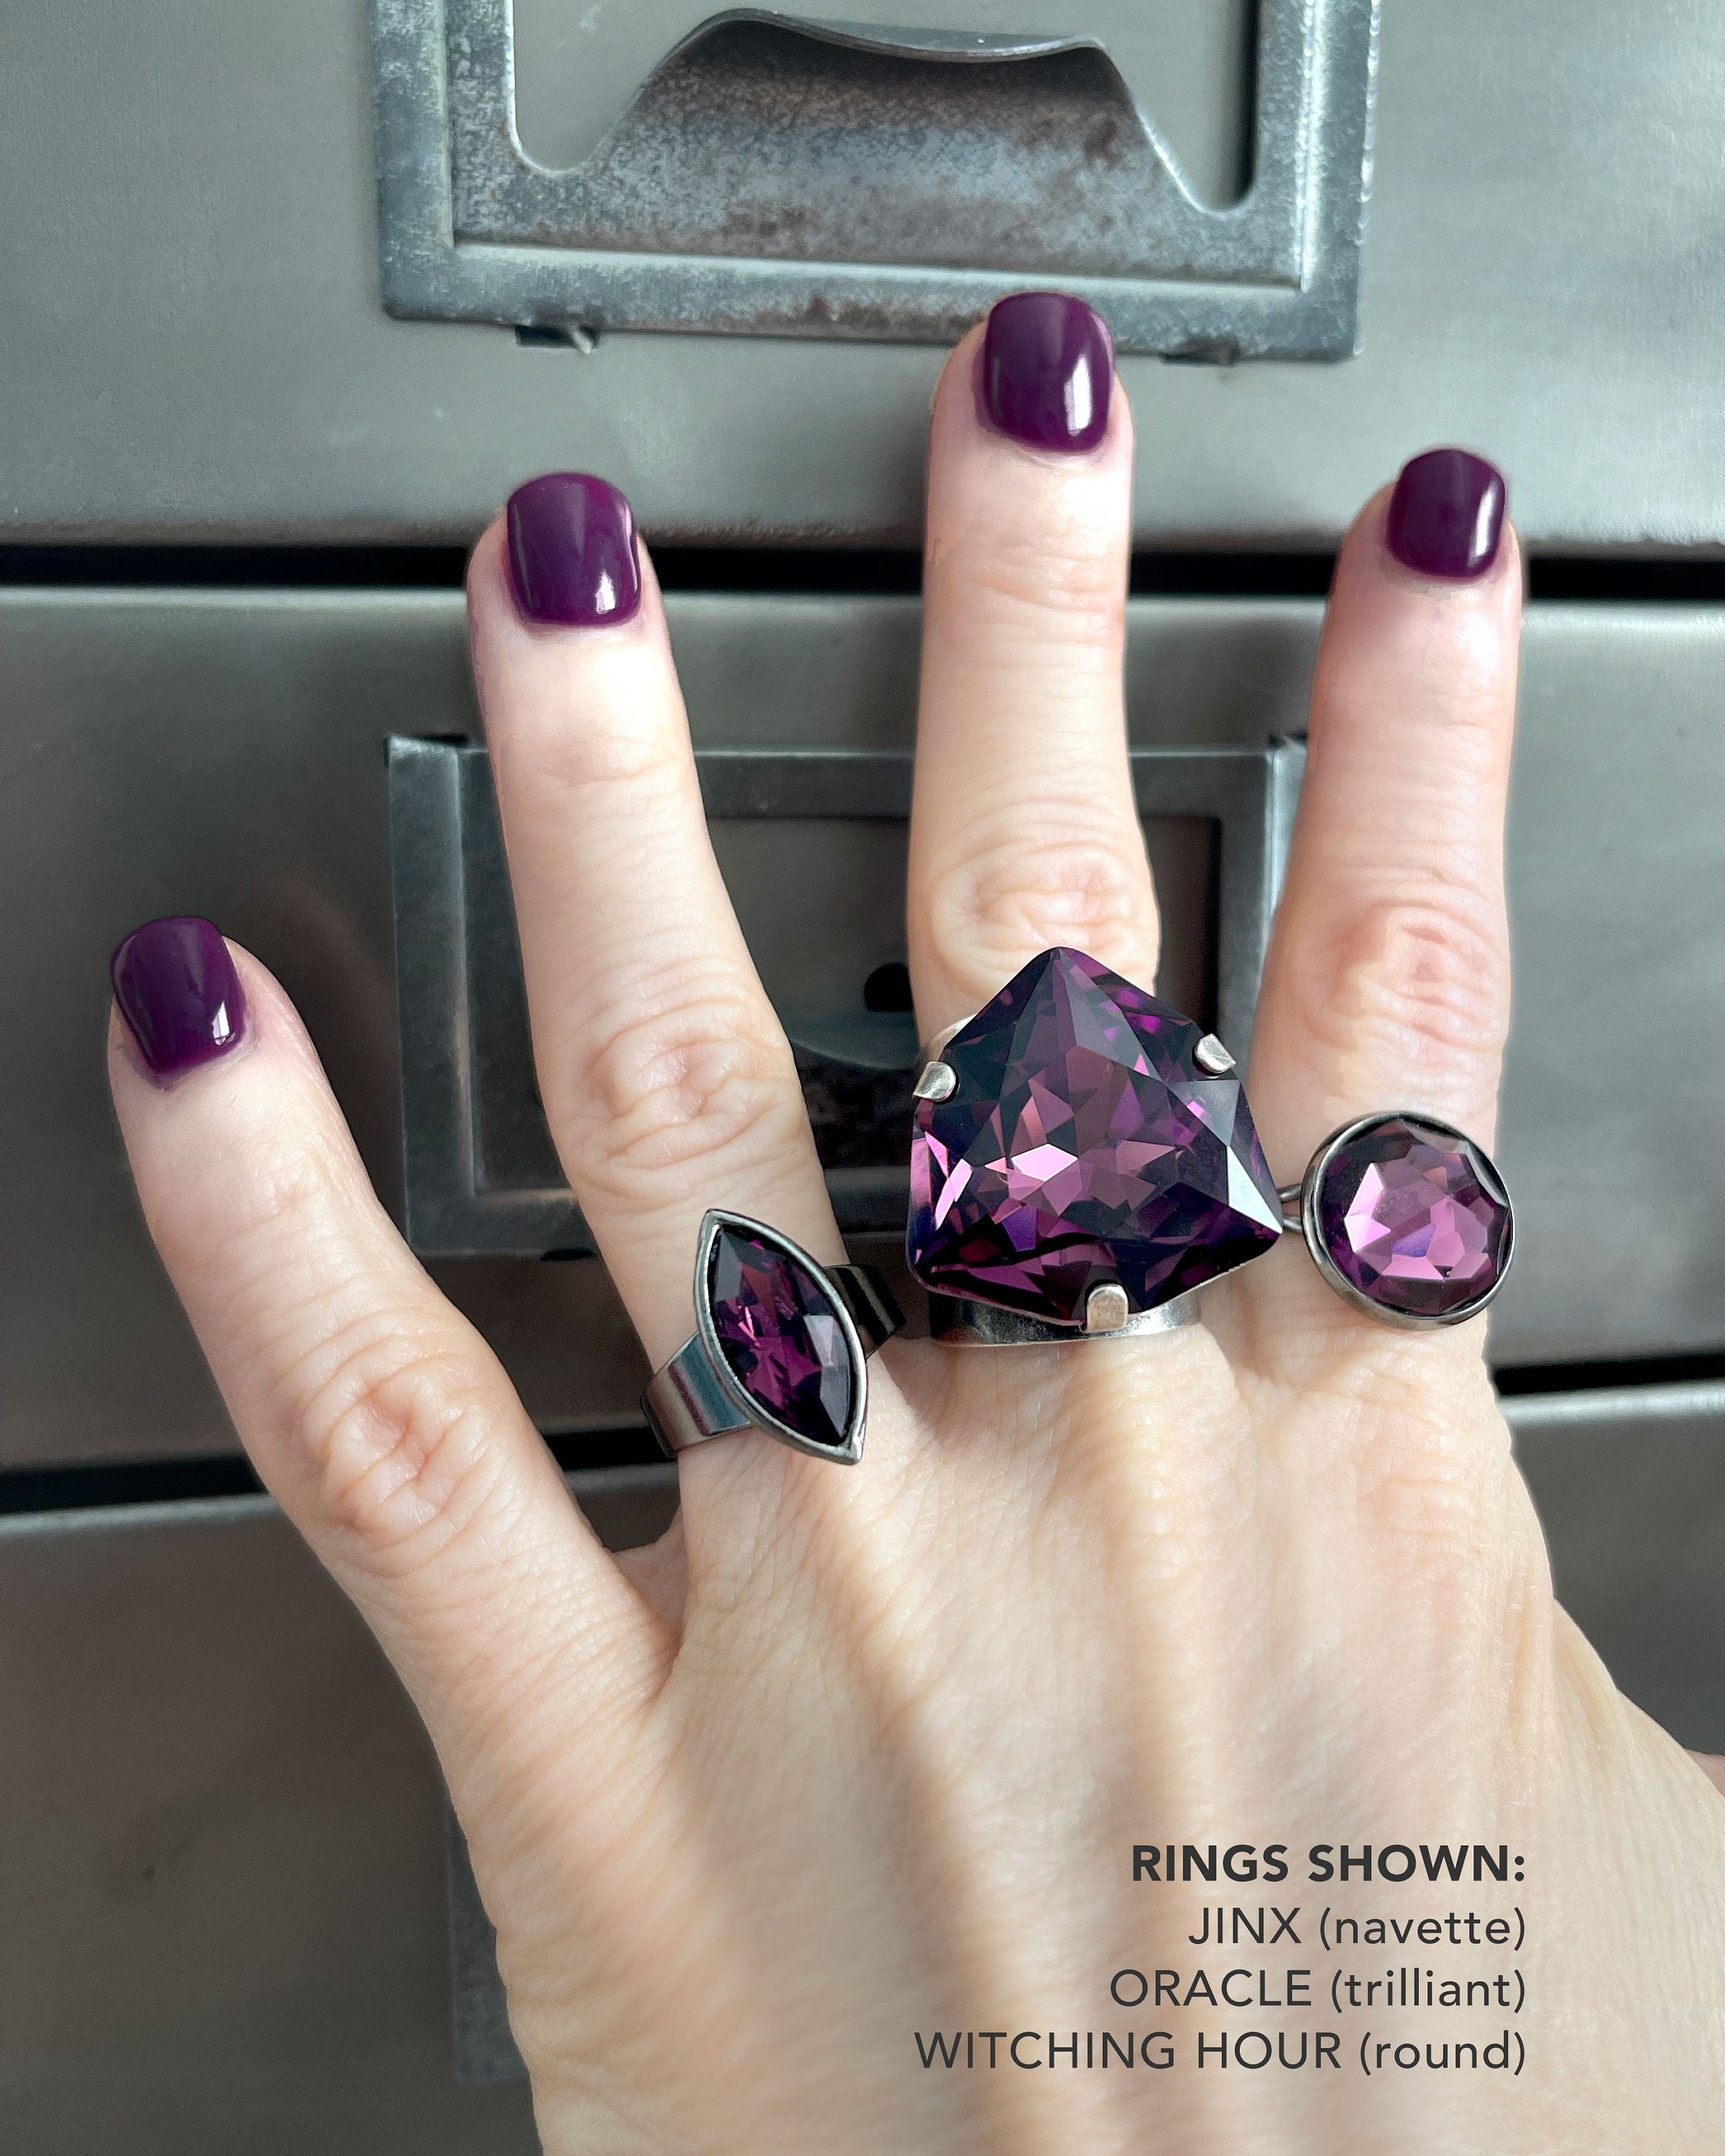 WITCHING HOUR - Gothic Purple Crystal Ring w Vintage 'Amethyst' Crystal, Black Gunmetal Adjustable Ring Band, Goth Witch Halloween Jewelry